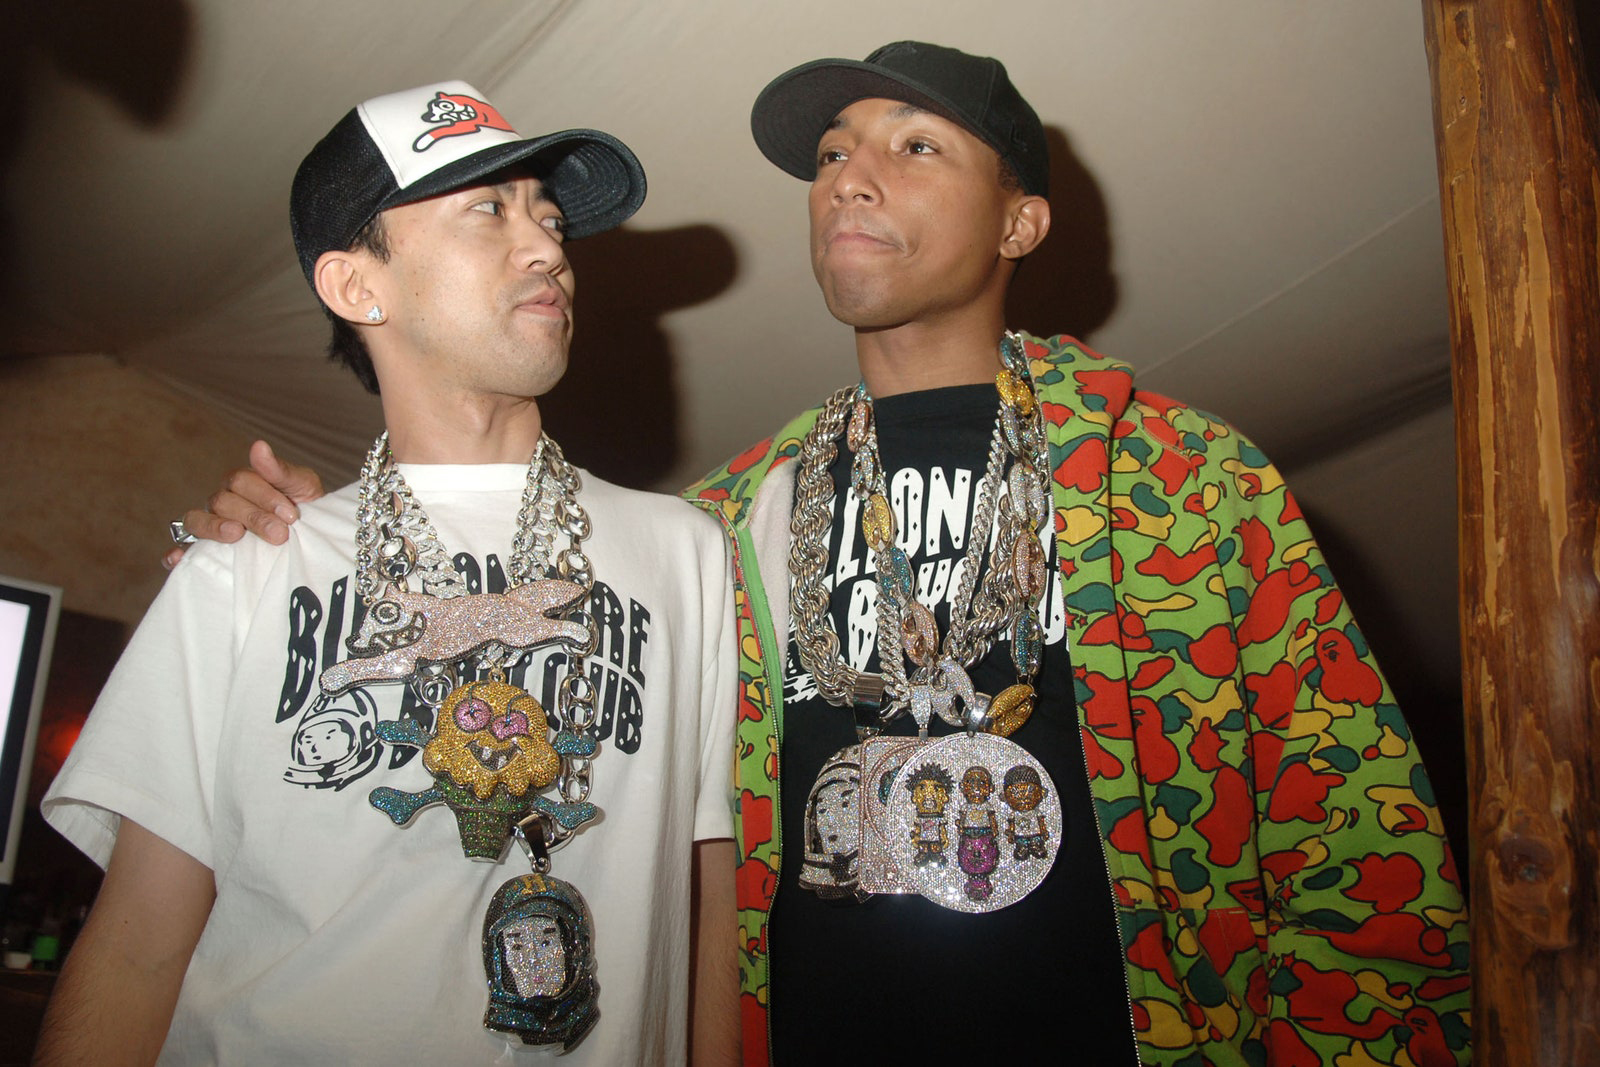 Williams with his closest collaborator Nigo in 2005, the year the duo co-founded Billionaire Boys Club.